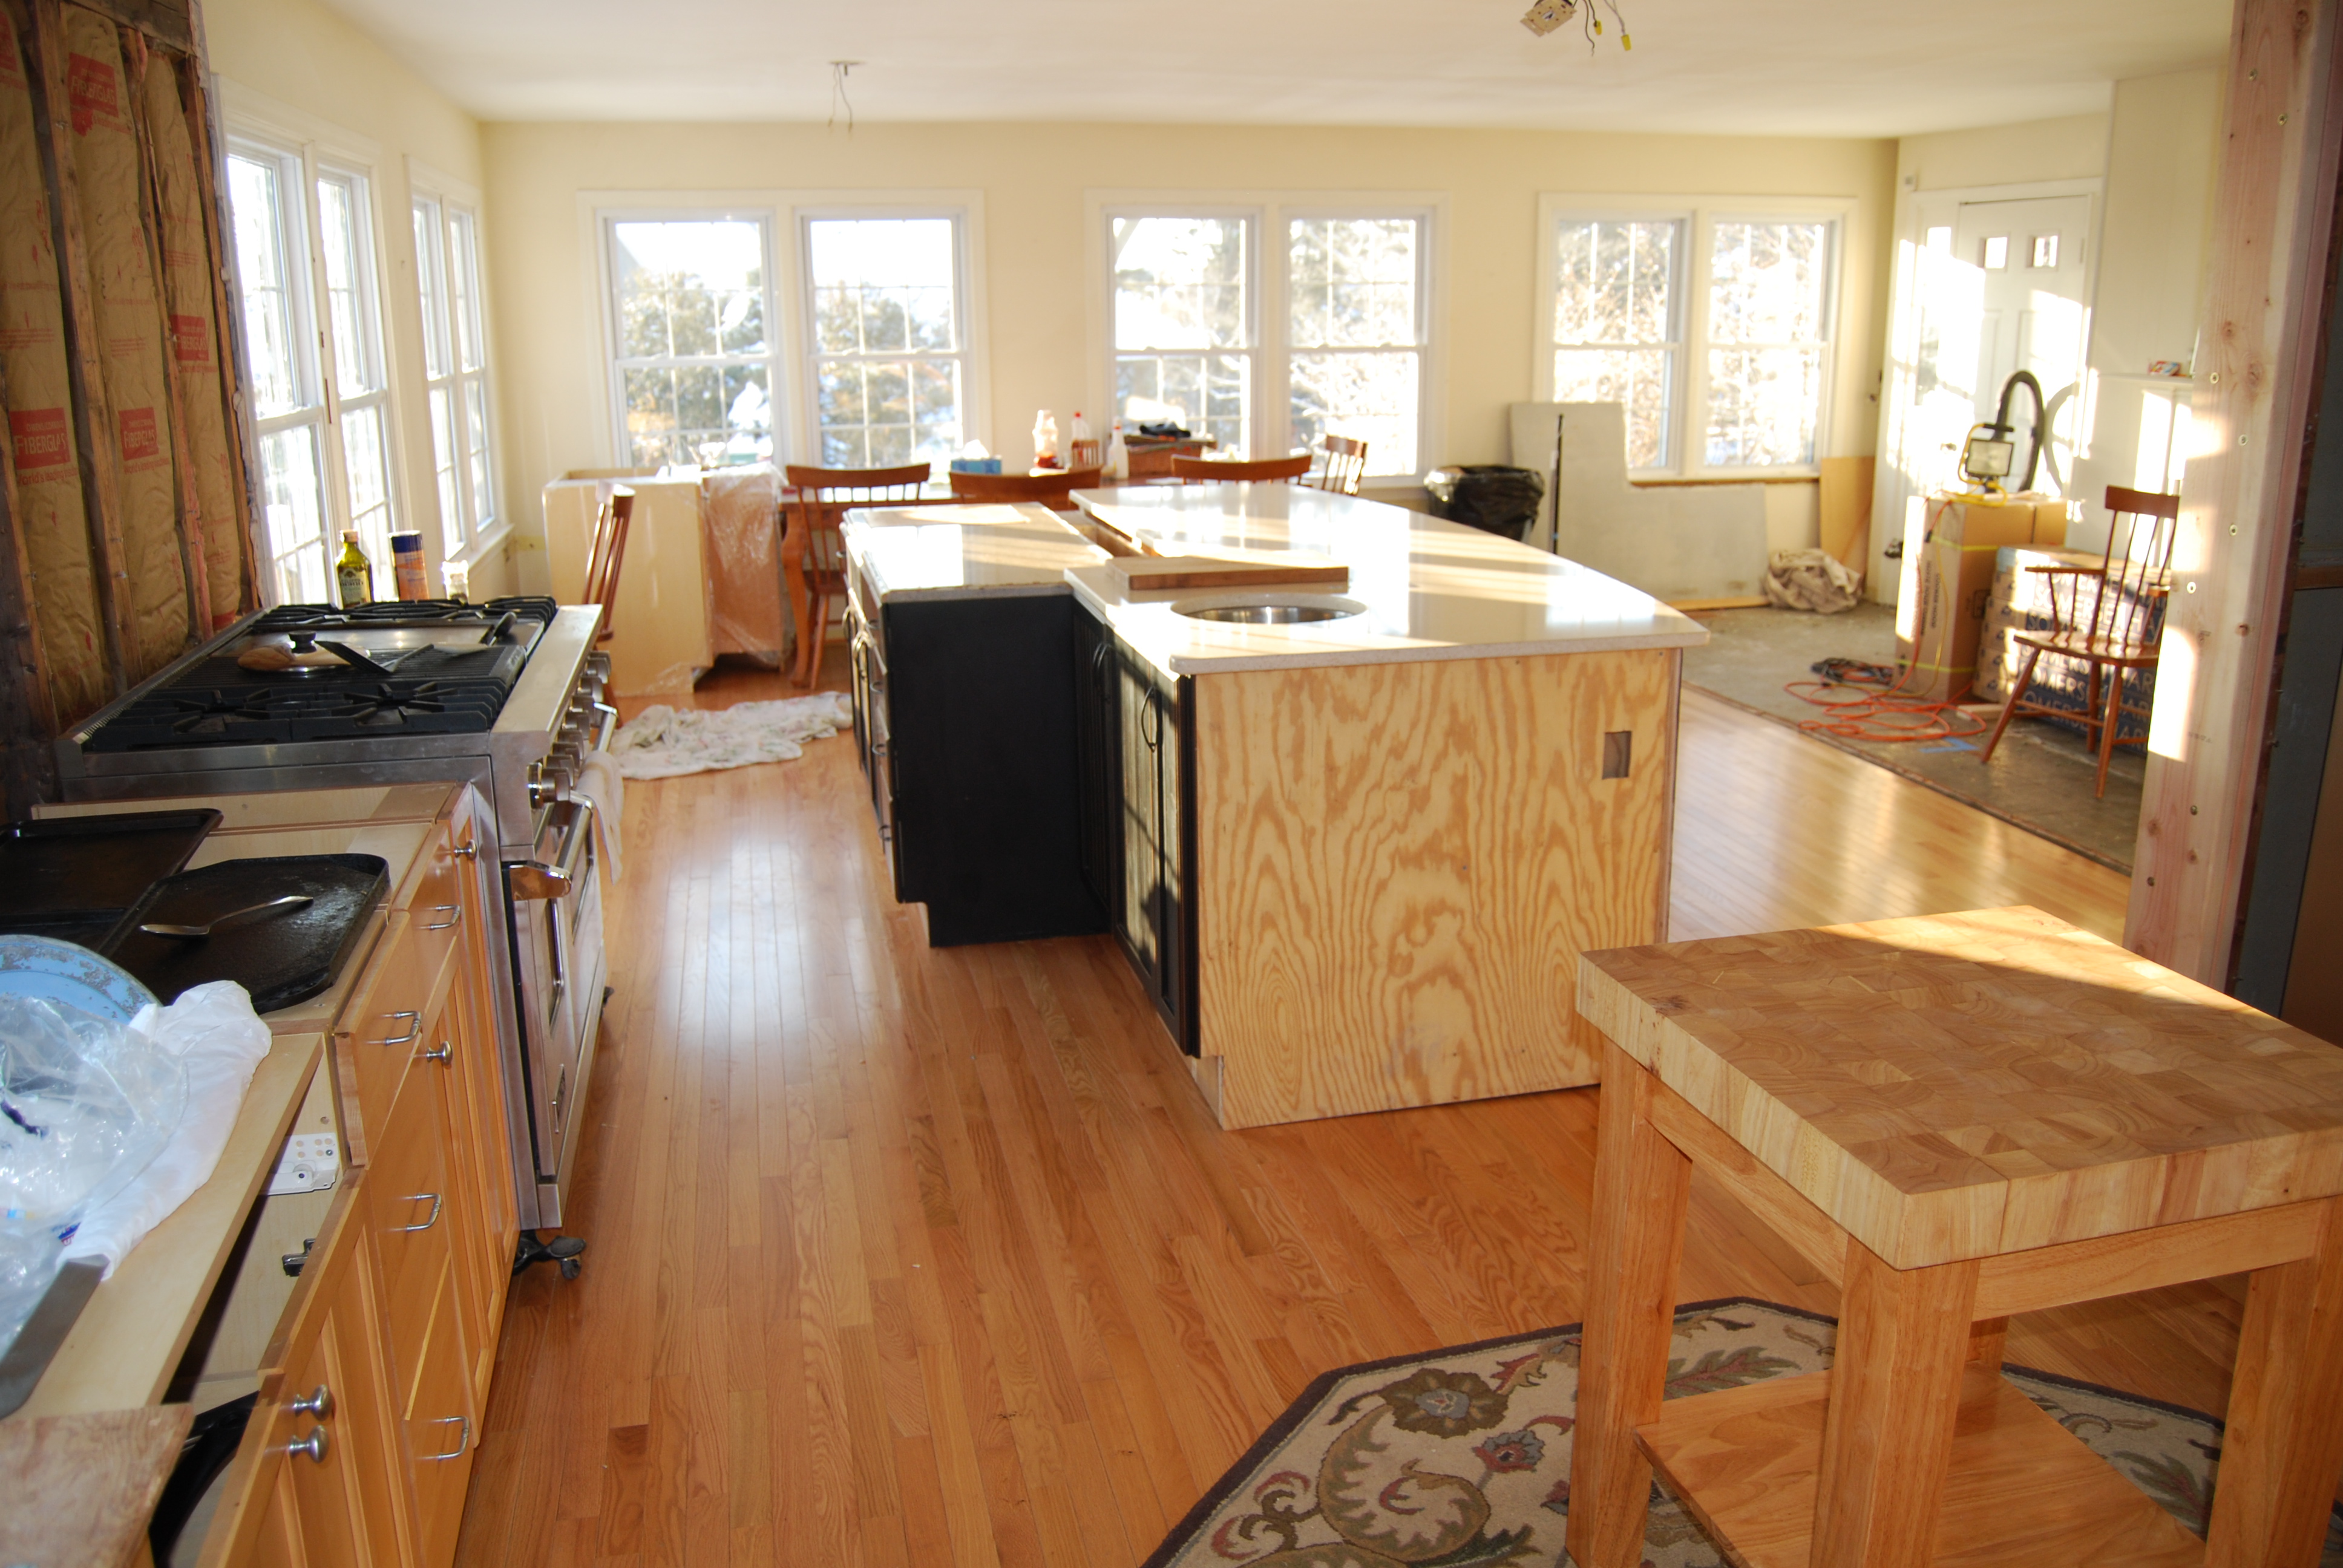 Brand new hardwood floors, and a beautiful island to extend the kitchen feel a bit into this area.